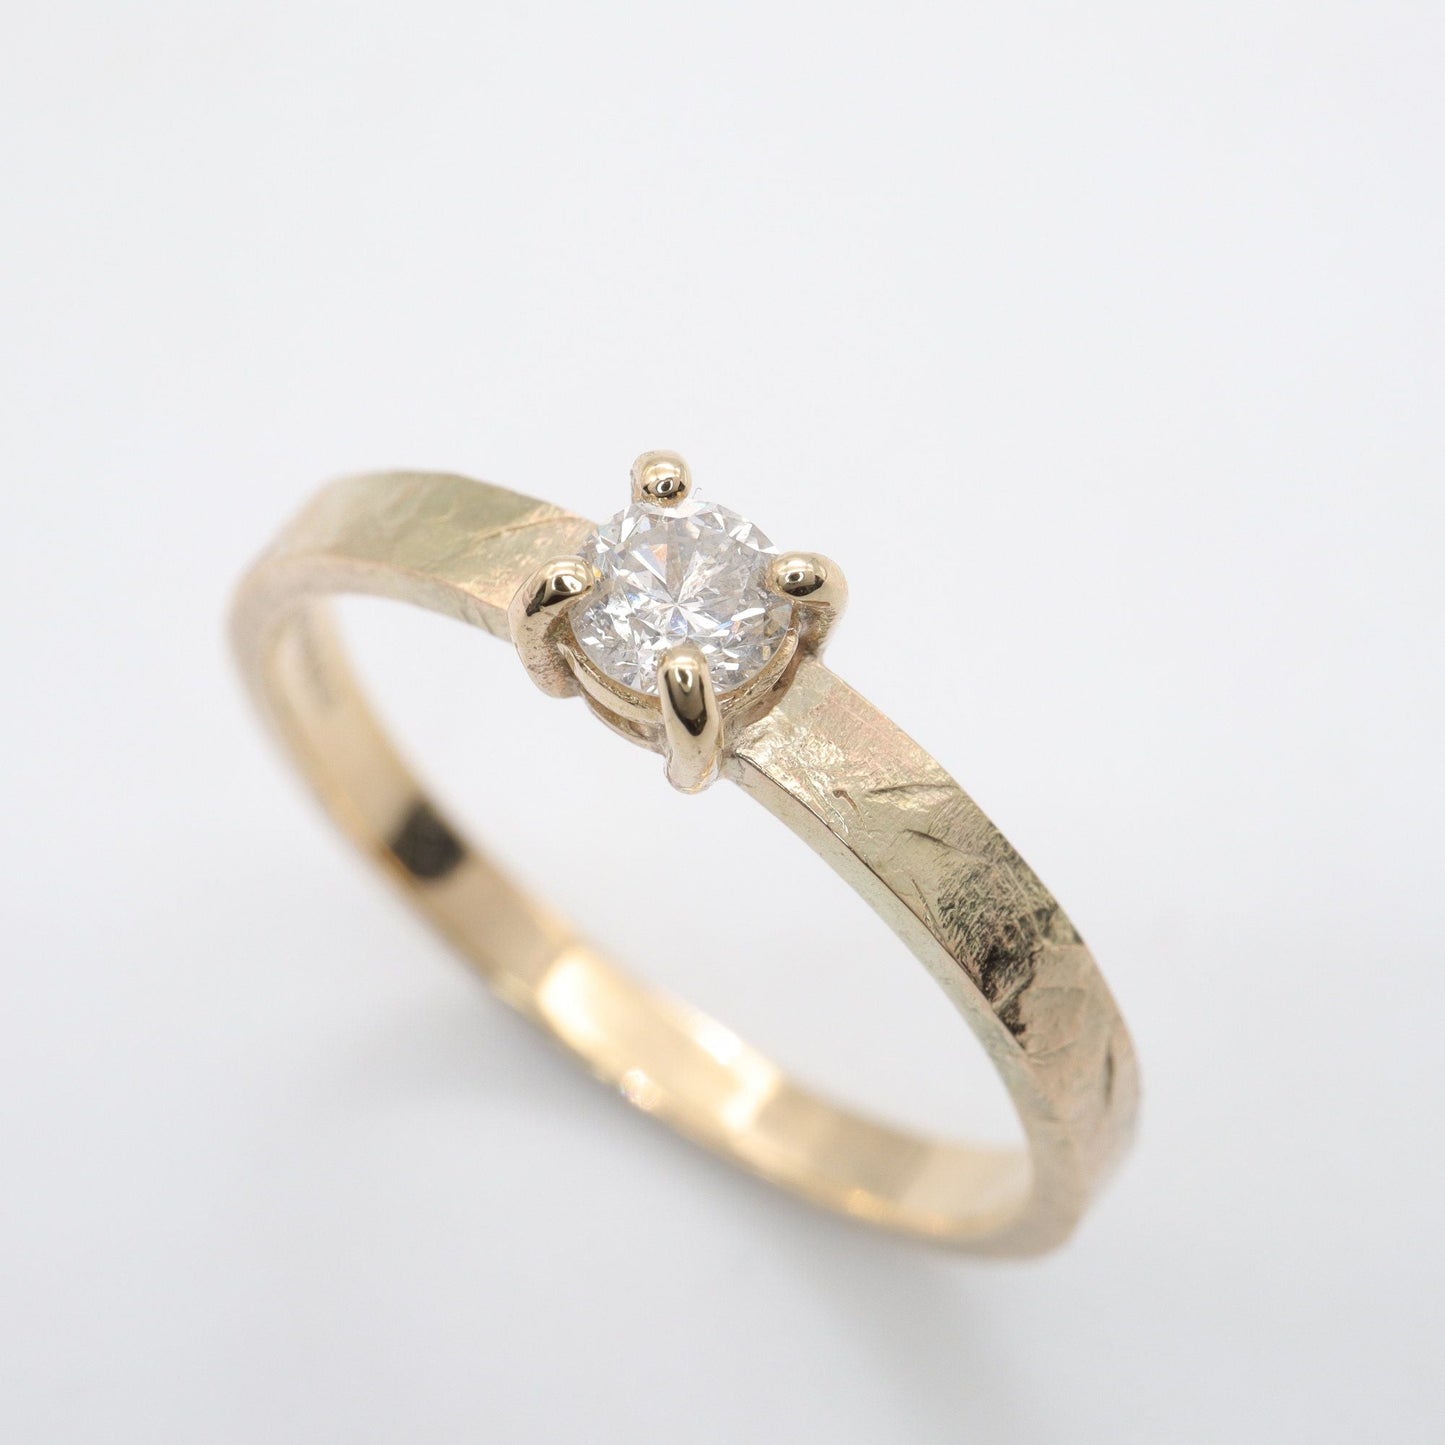 Diamond solitaire ring, Windermere design in yellow gold size N 1/2